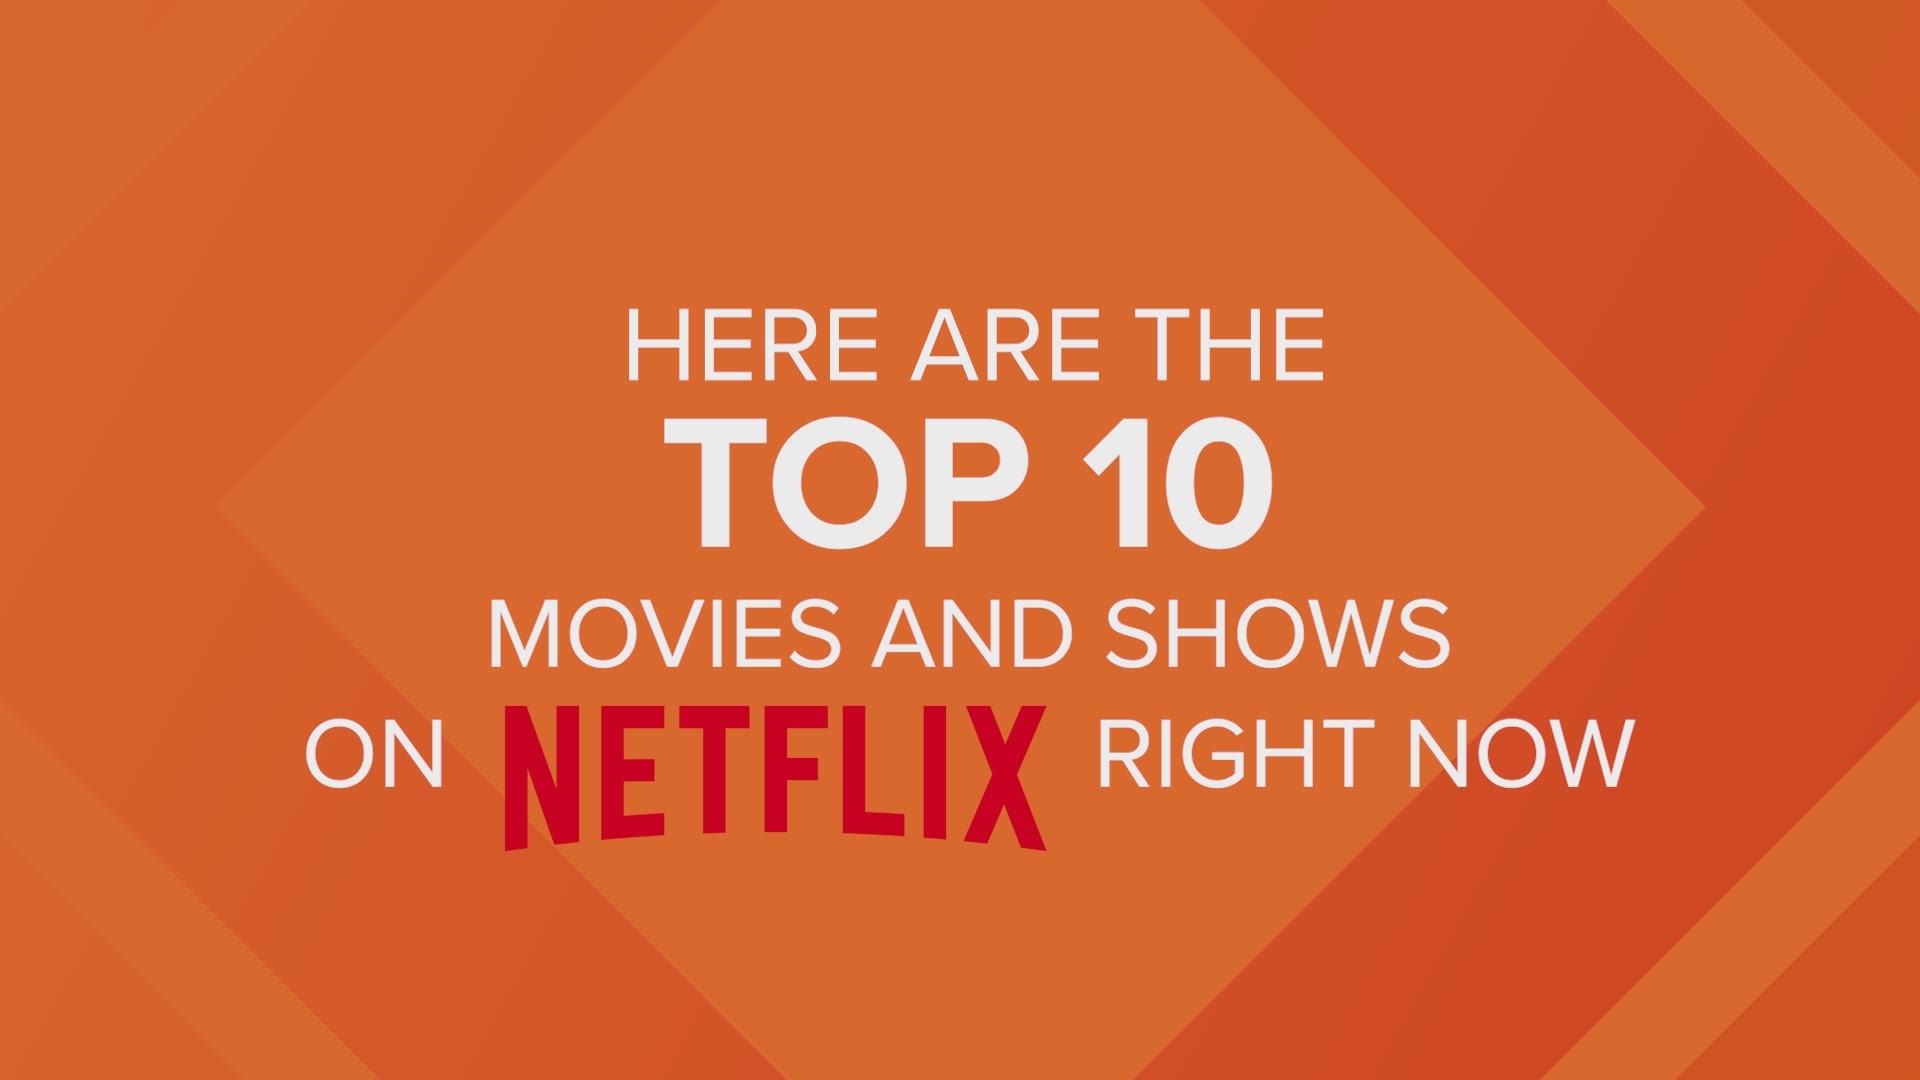 You need something to watch while you're stuck at home during this pandemic. So here are the top 10 movies and TV shows on Netflix right now.